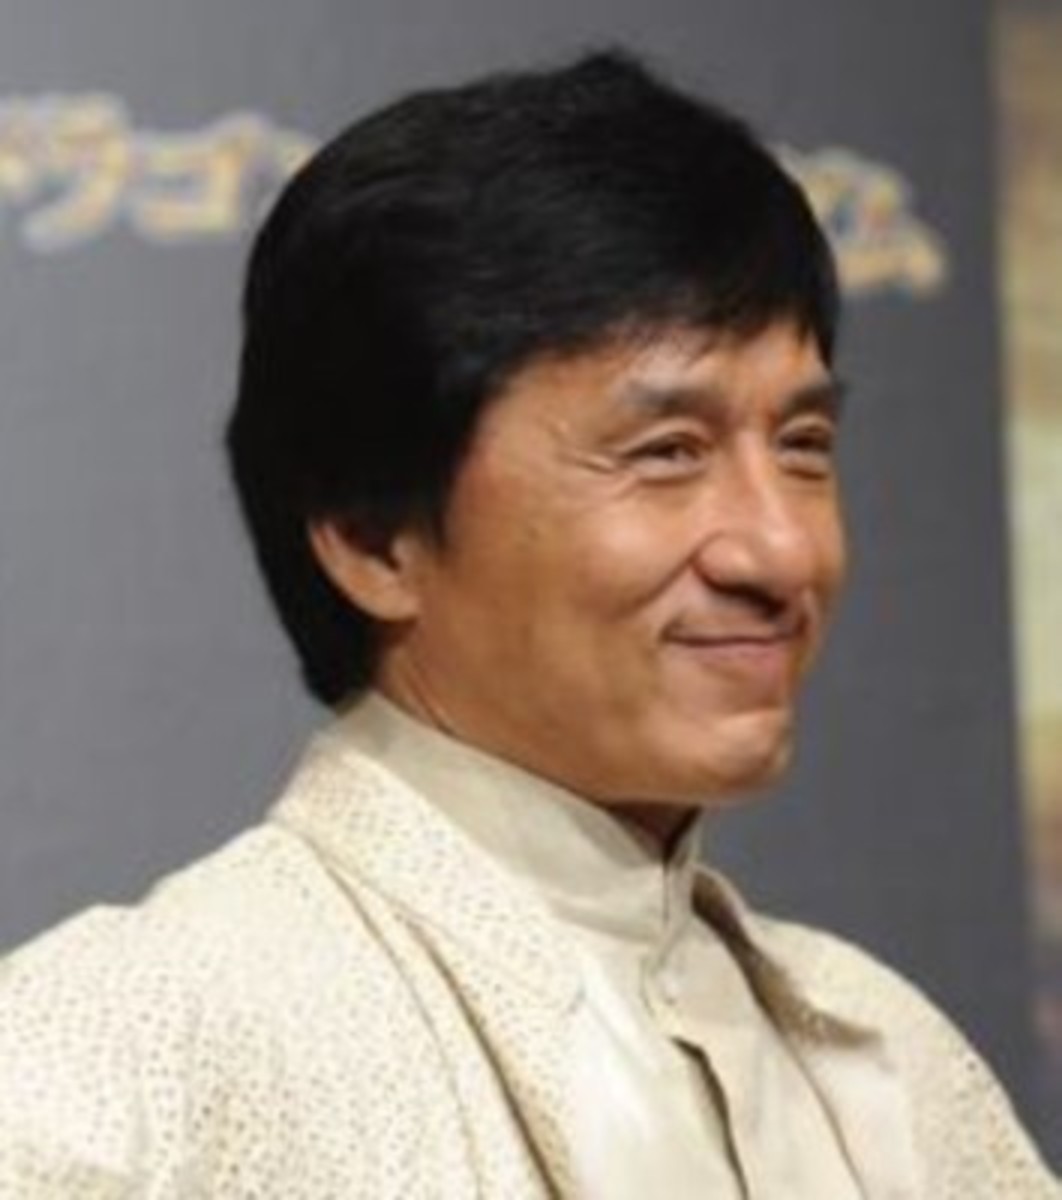 He has neatly cut short black hair, a pleasant smile, and friendly eyes. He appears to be quite fit. He is wearing a white traditional Chinese suit. He seems to be a confident man. 